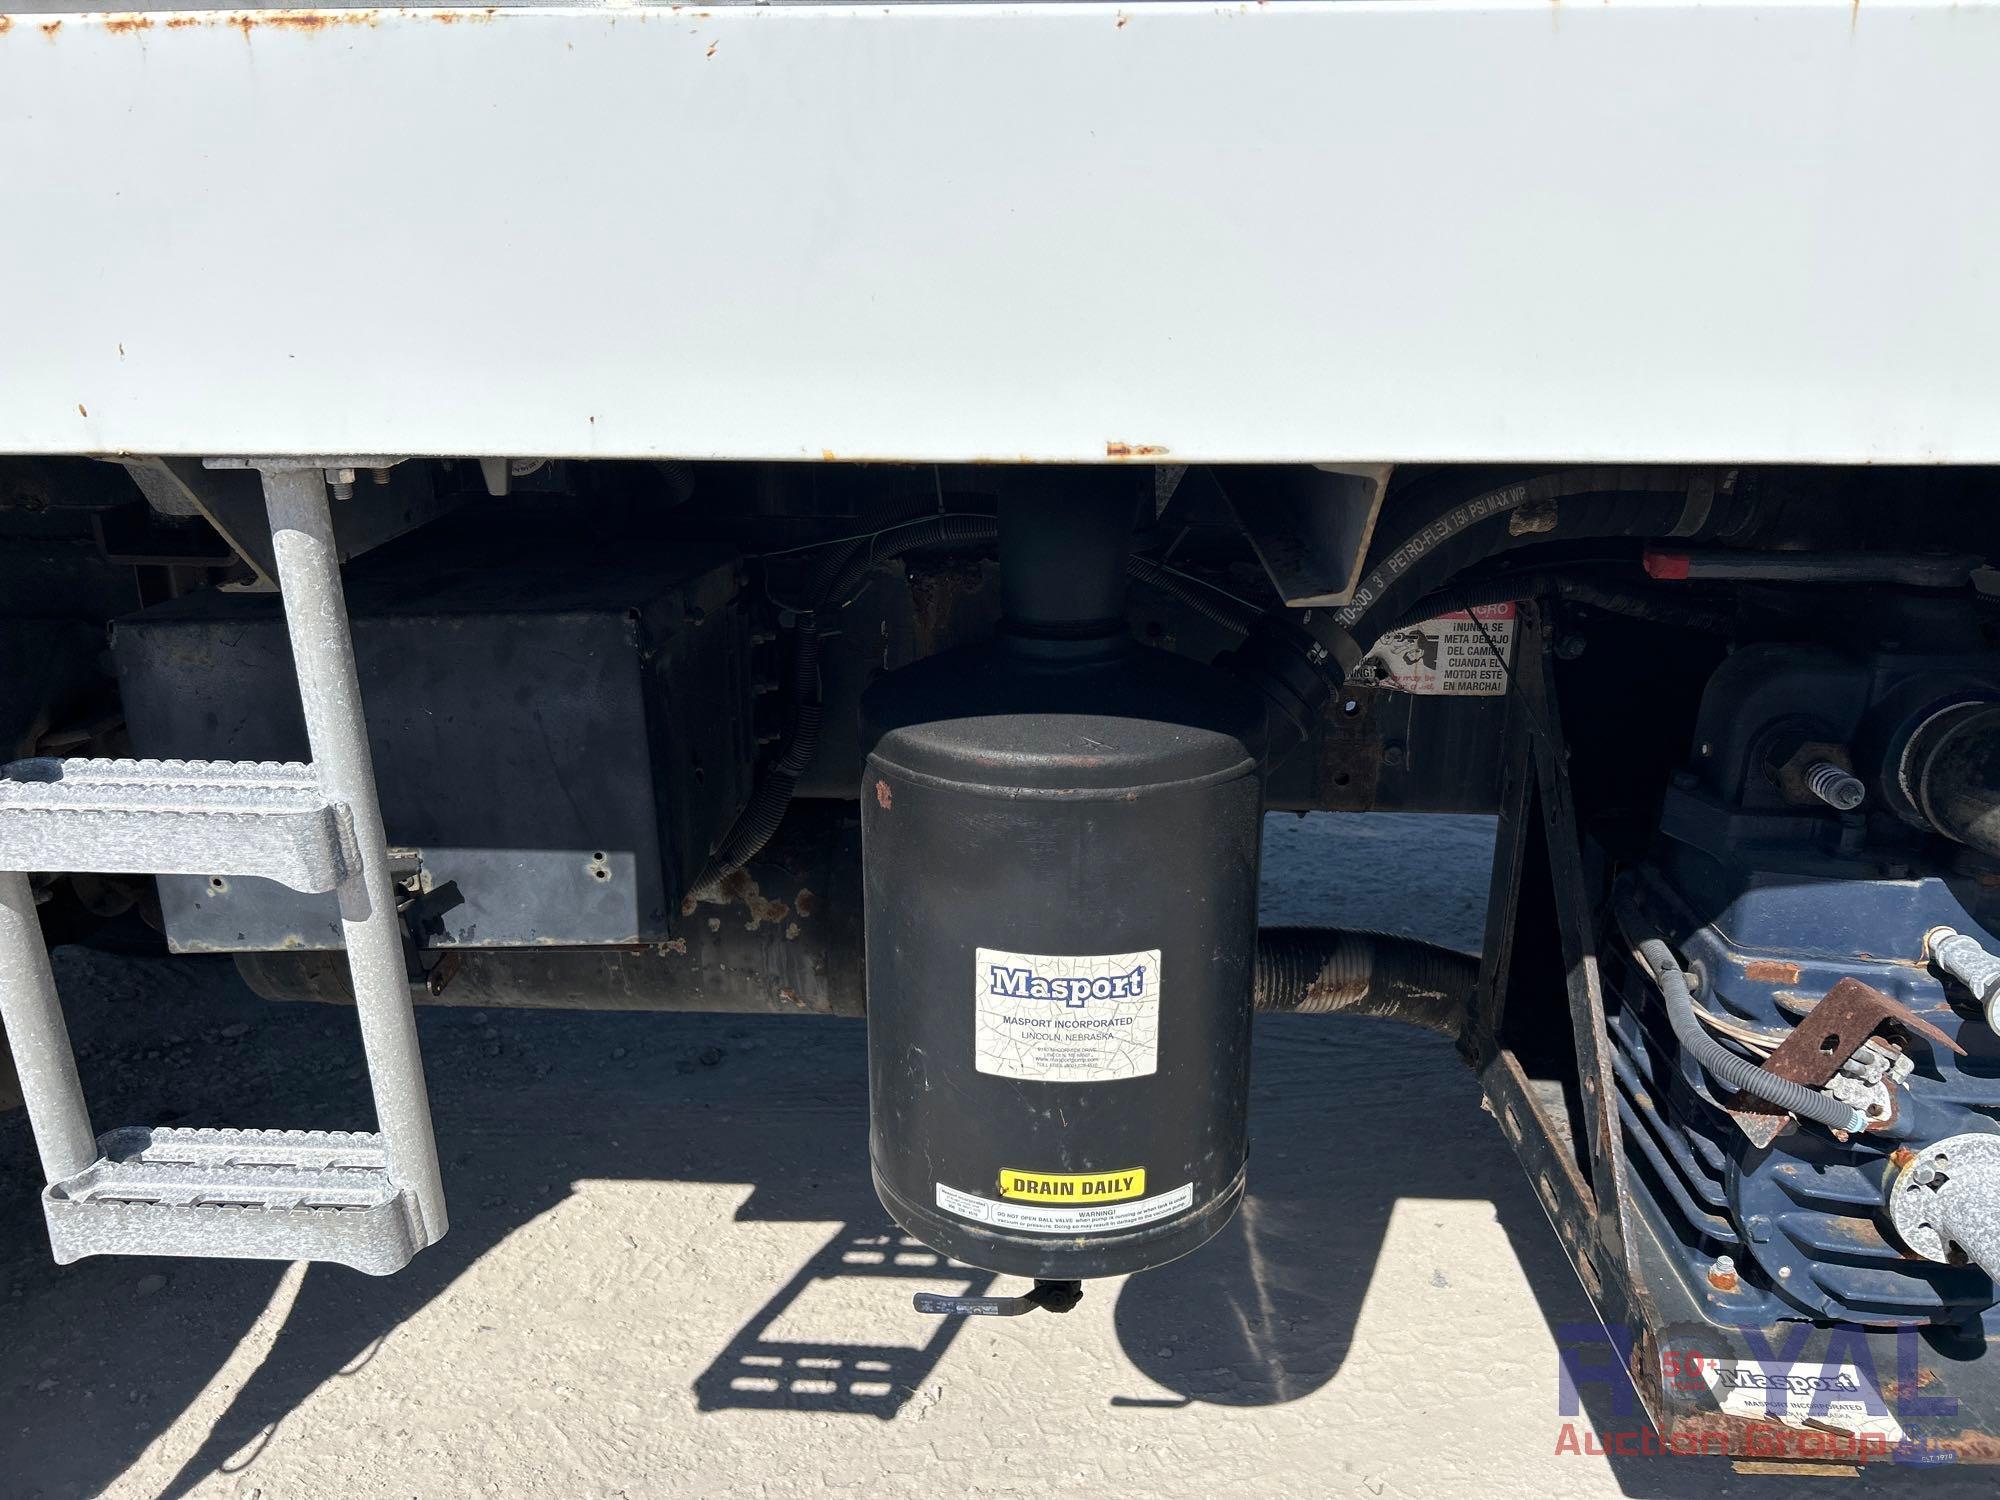 1994 Ford F800 2500 Gallon Water Truck